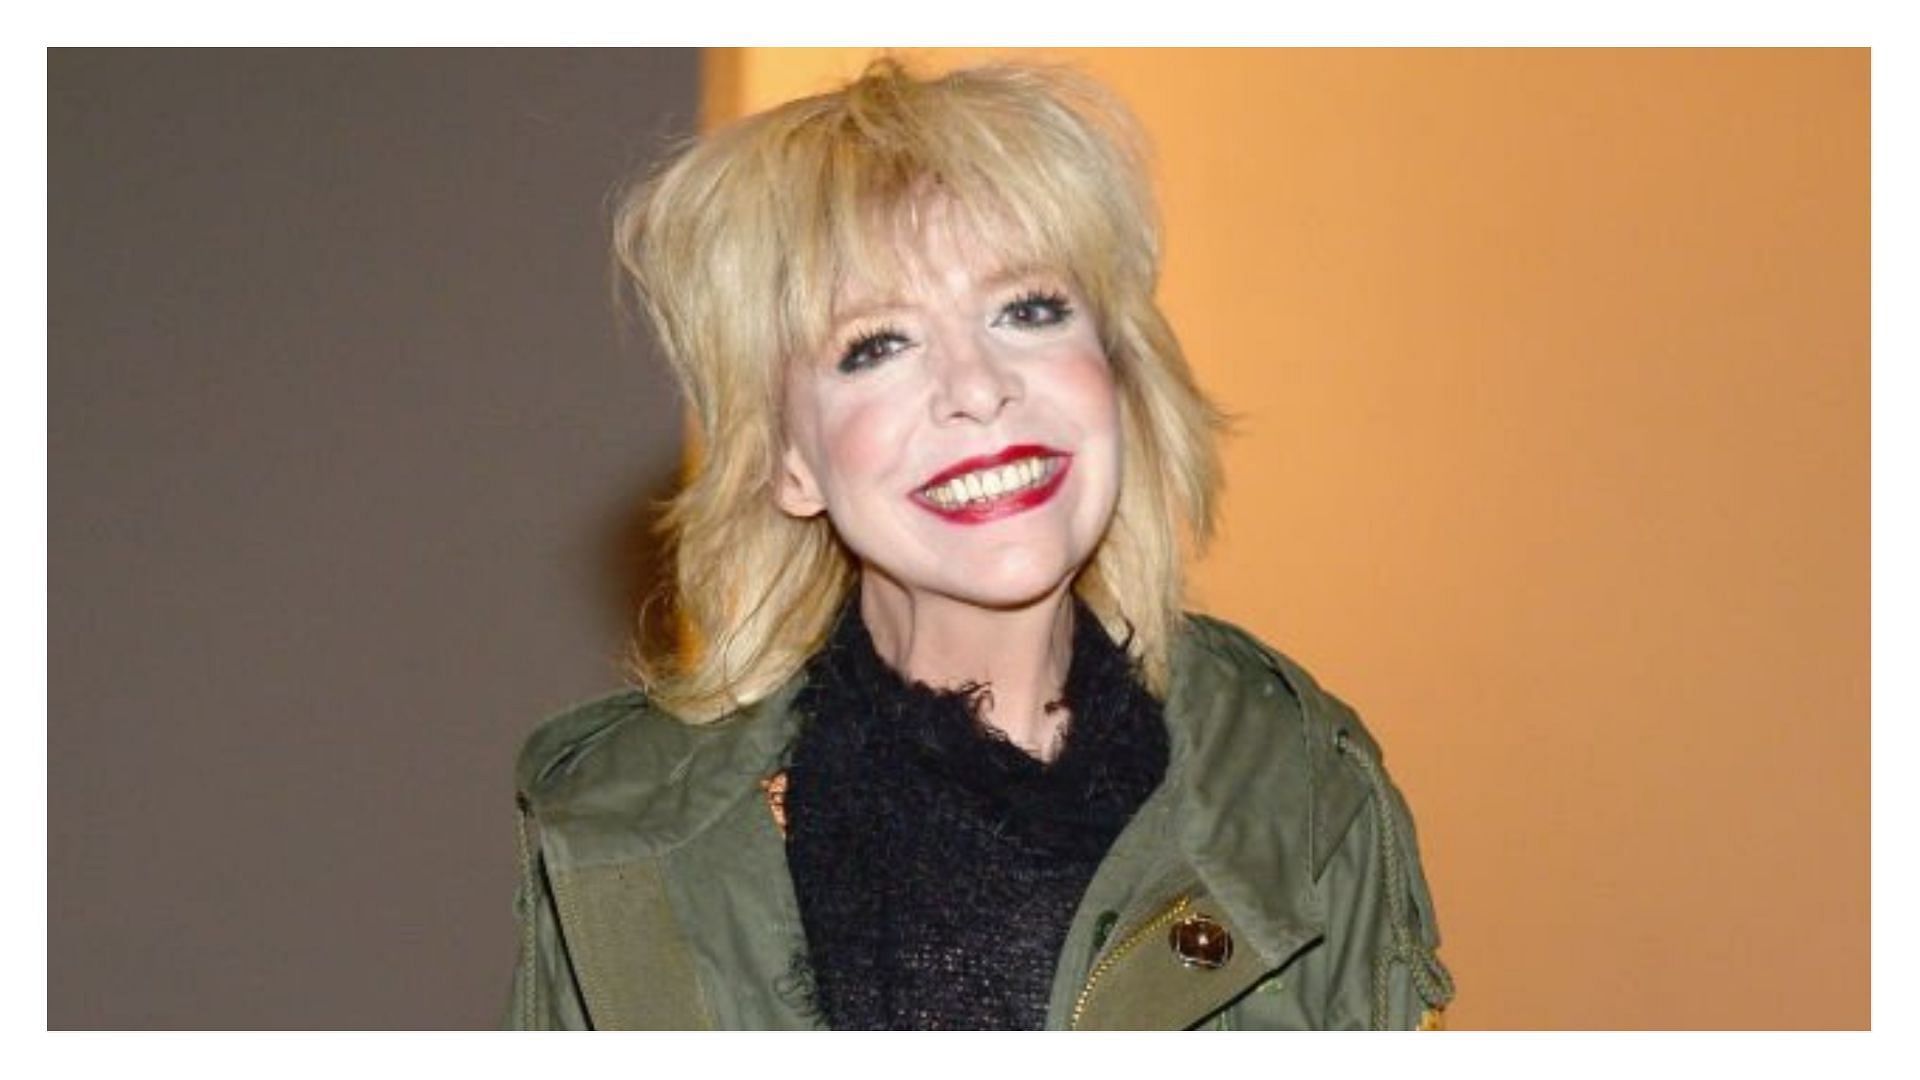 Julee Cruise recently died at the age of 65 (Image via Andrew Toth/Getty Images)